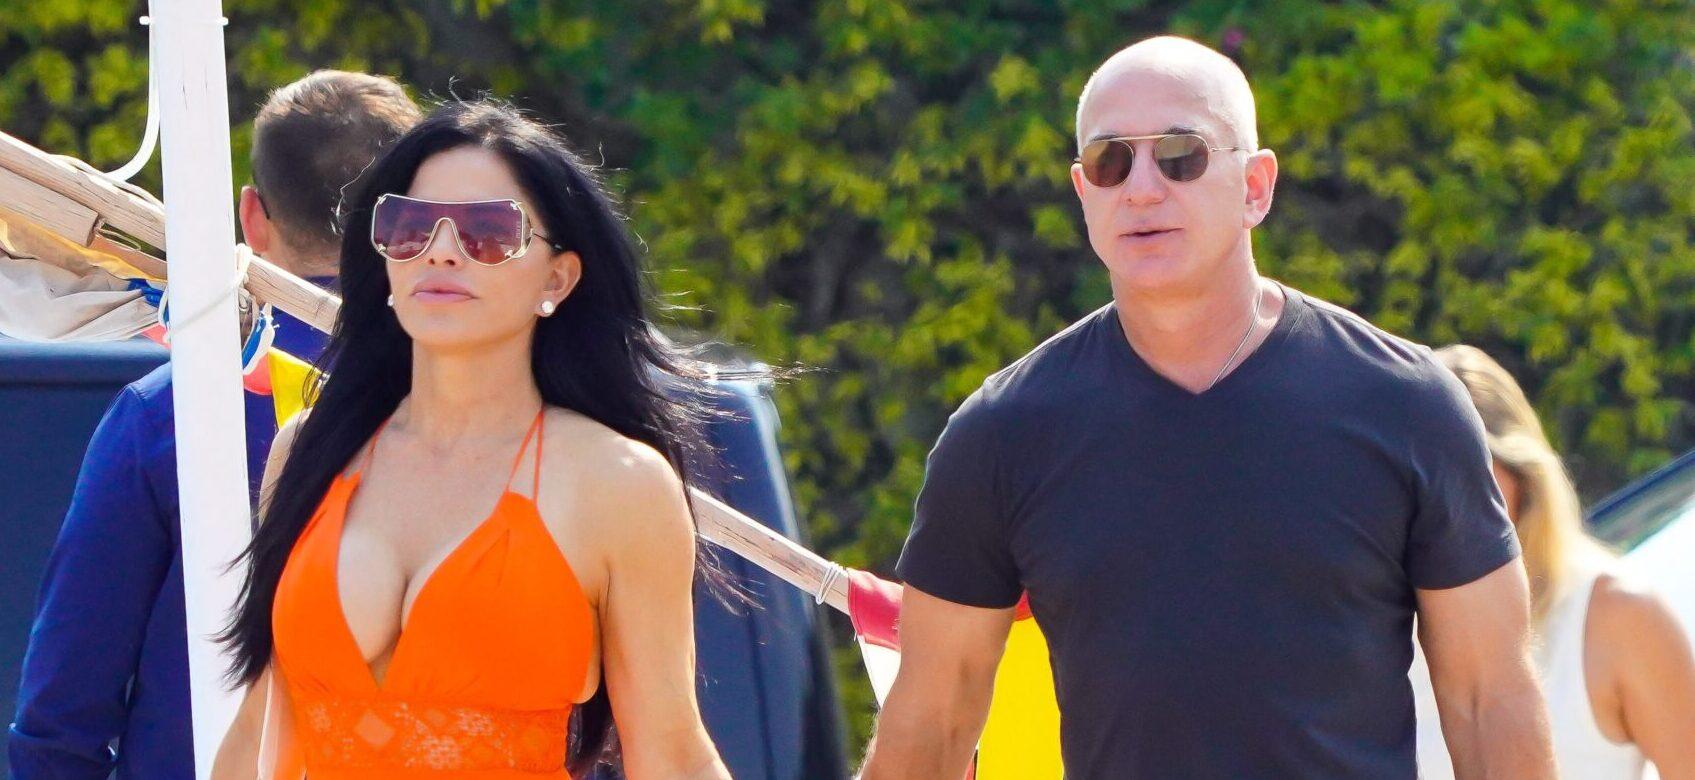 Jeff Bezos and Lauren Sanchez are seen out for a walk in Beaulieu sur Mer